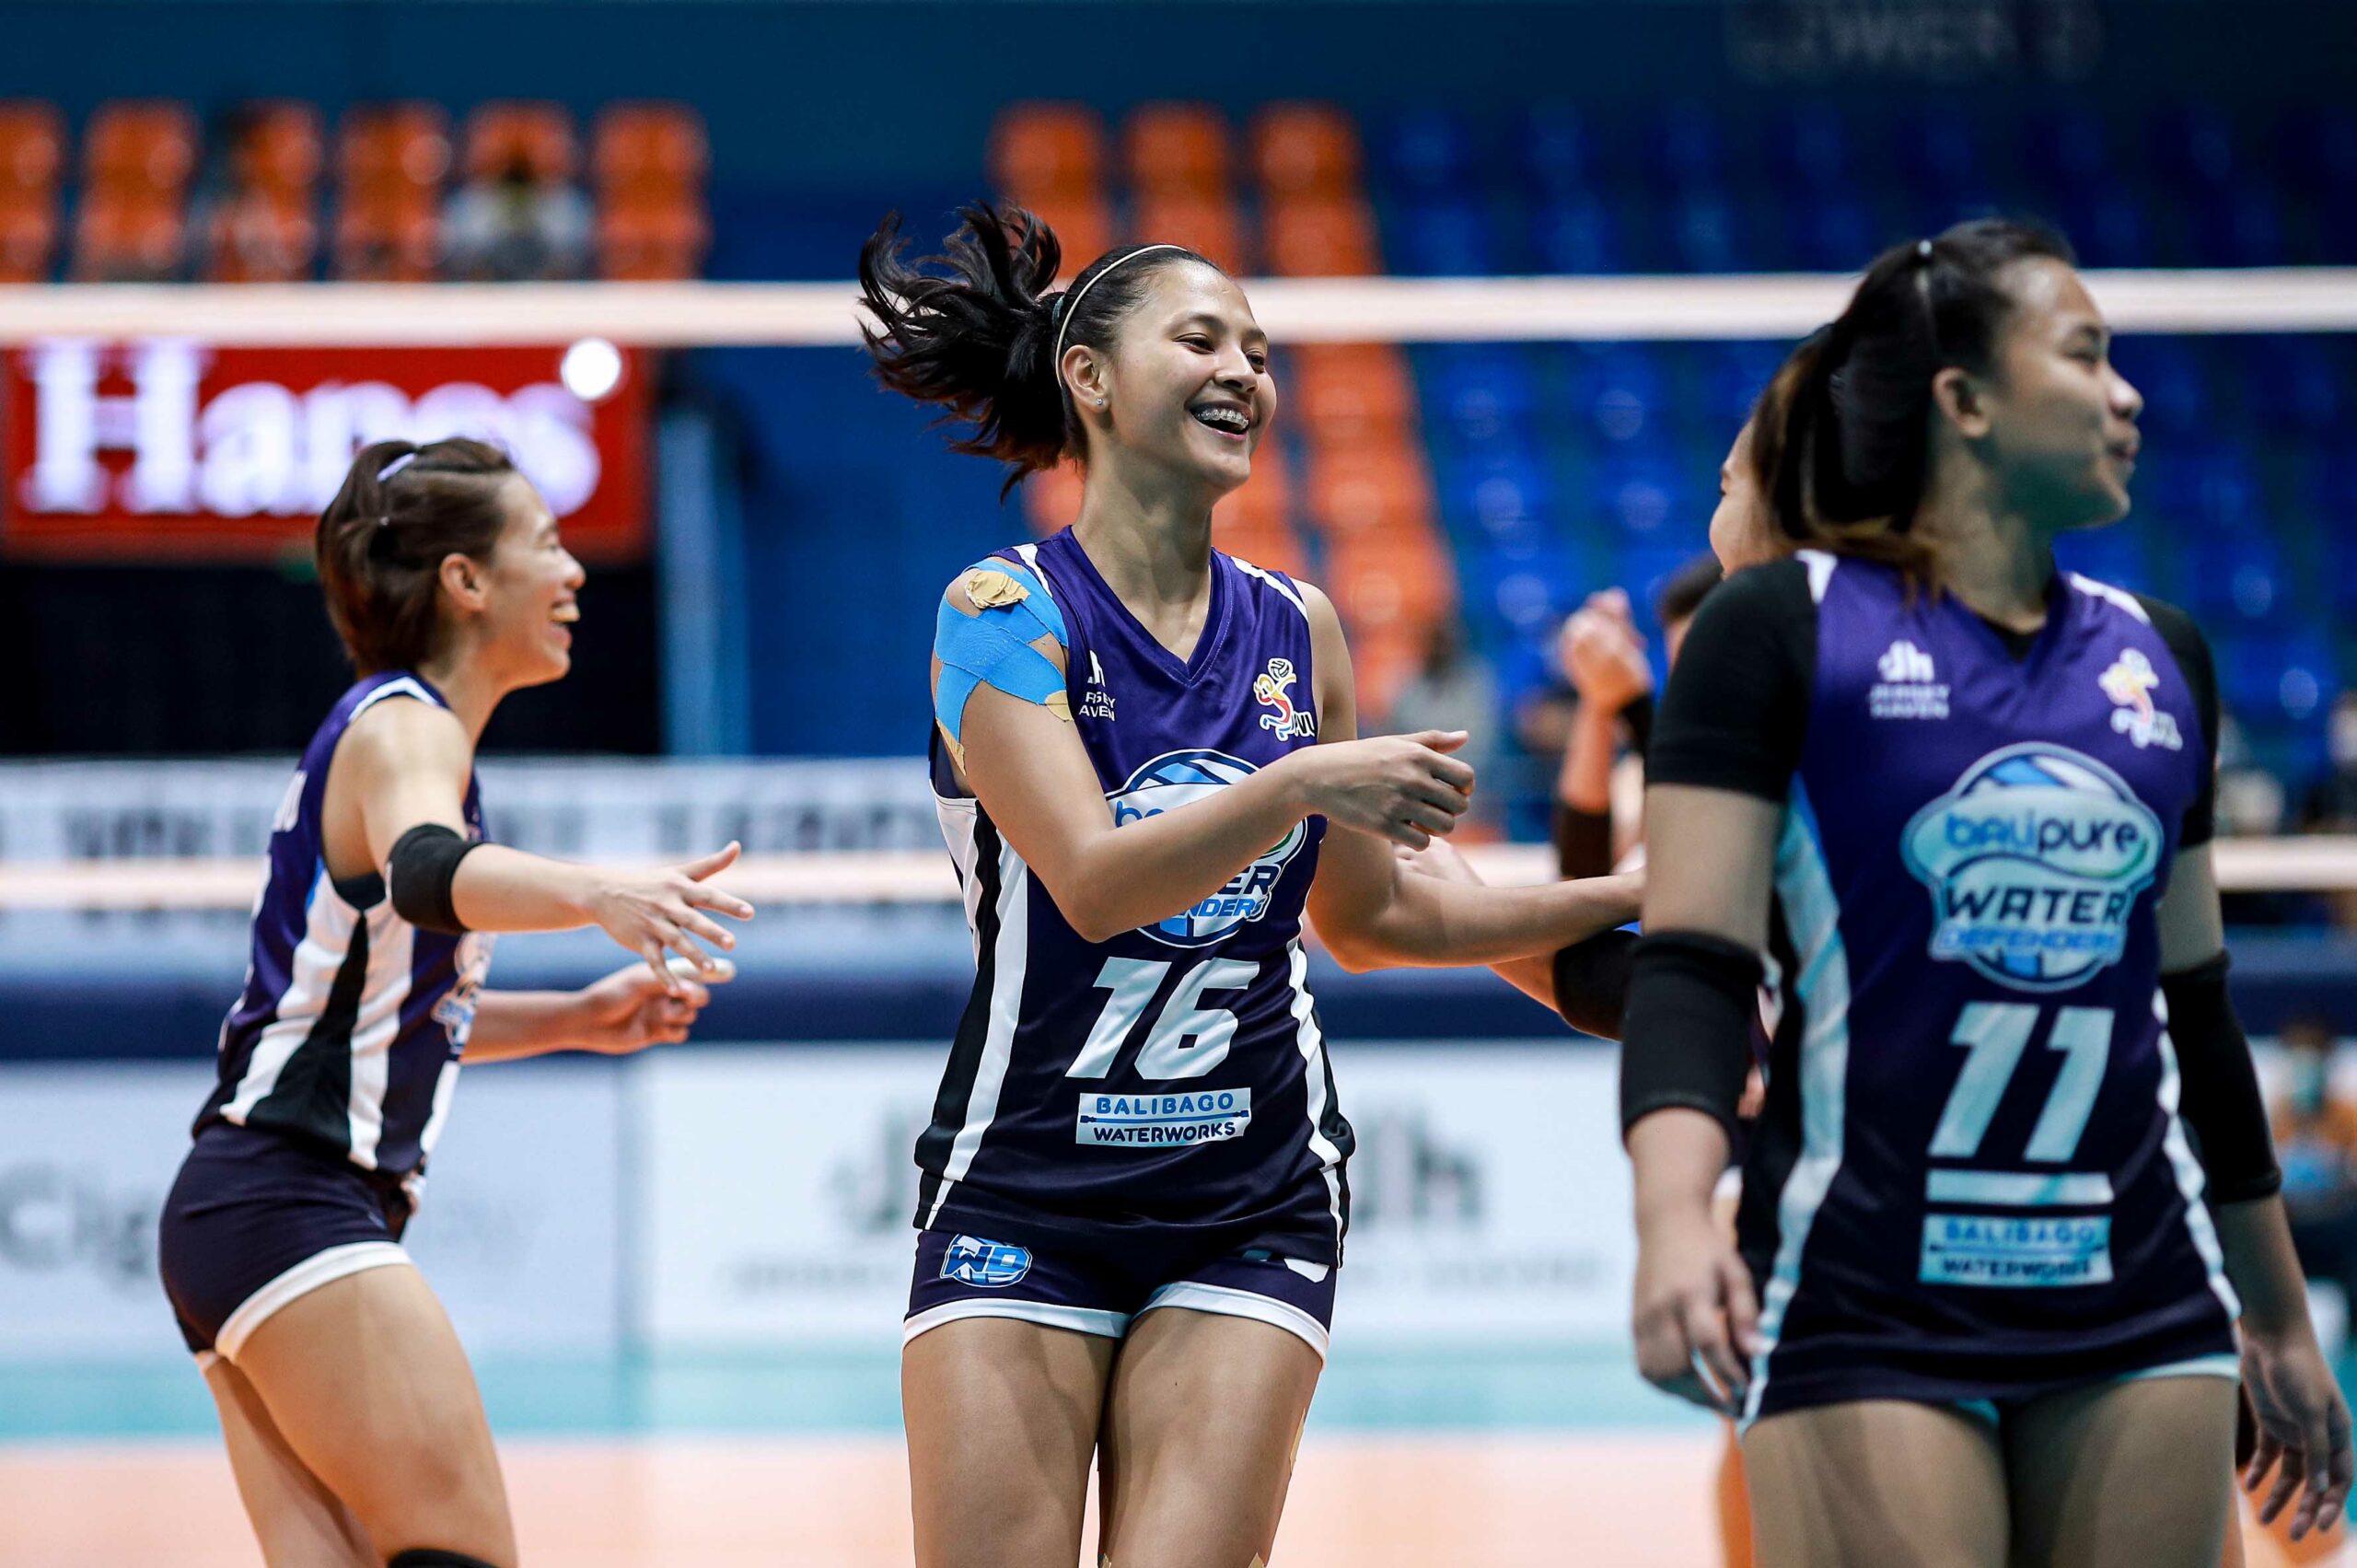 2022-PVL-Chery-vs-Balipure-julia-ipac-4-scaled Petro Gazz bolsters frontline with Galdones, Ipac News PVL Volleyball  - philippine sports news